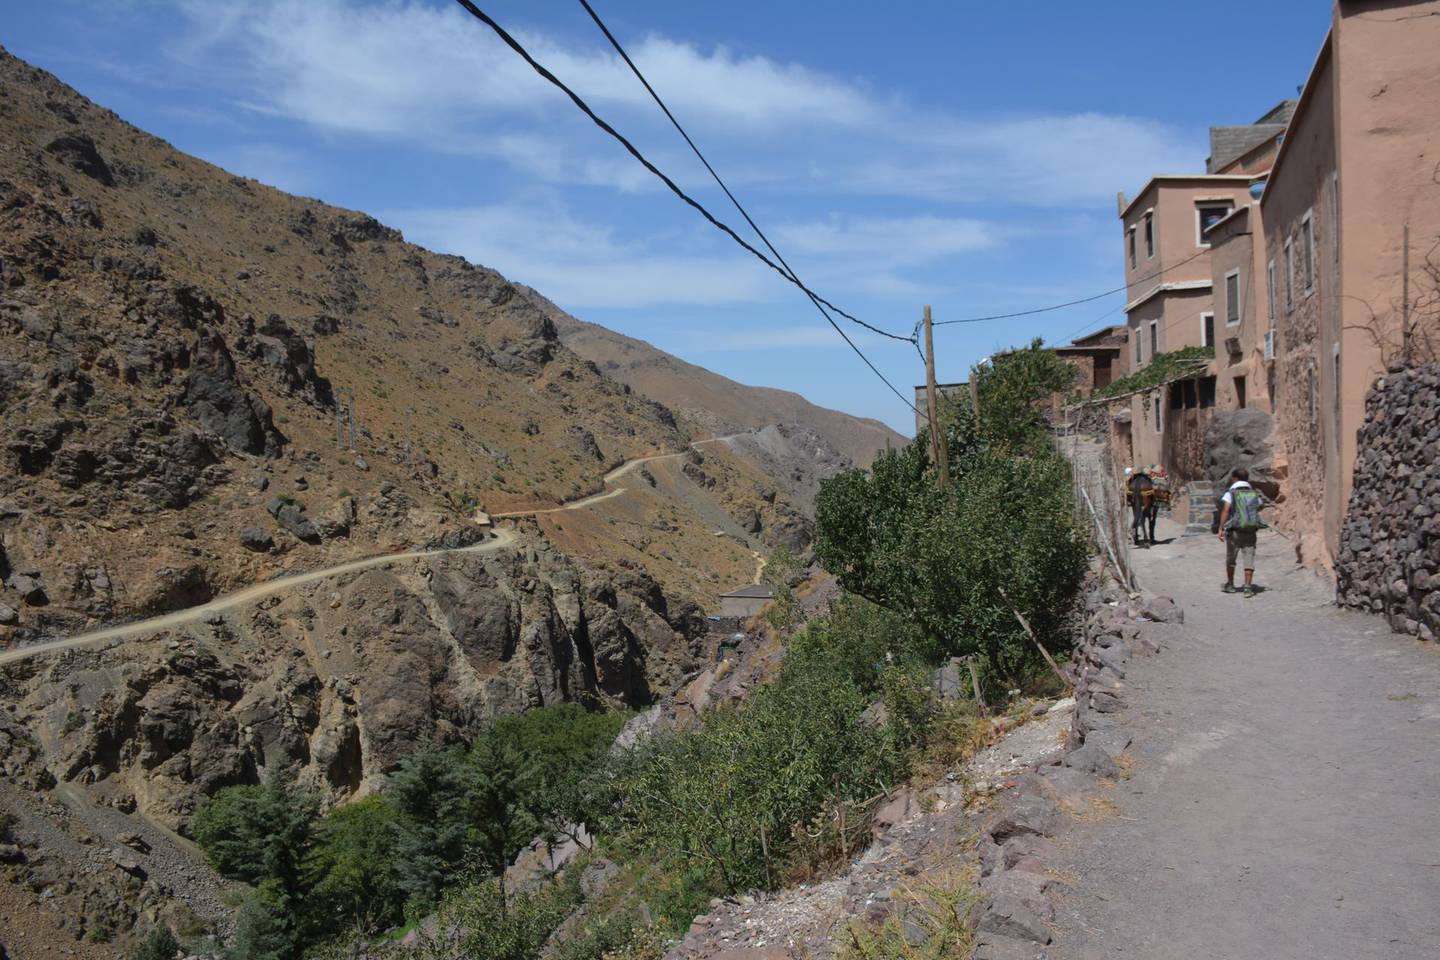 Walking through the village of Armed in the Atlas mountains. Rosemary Behan